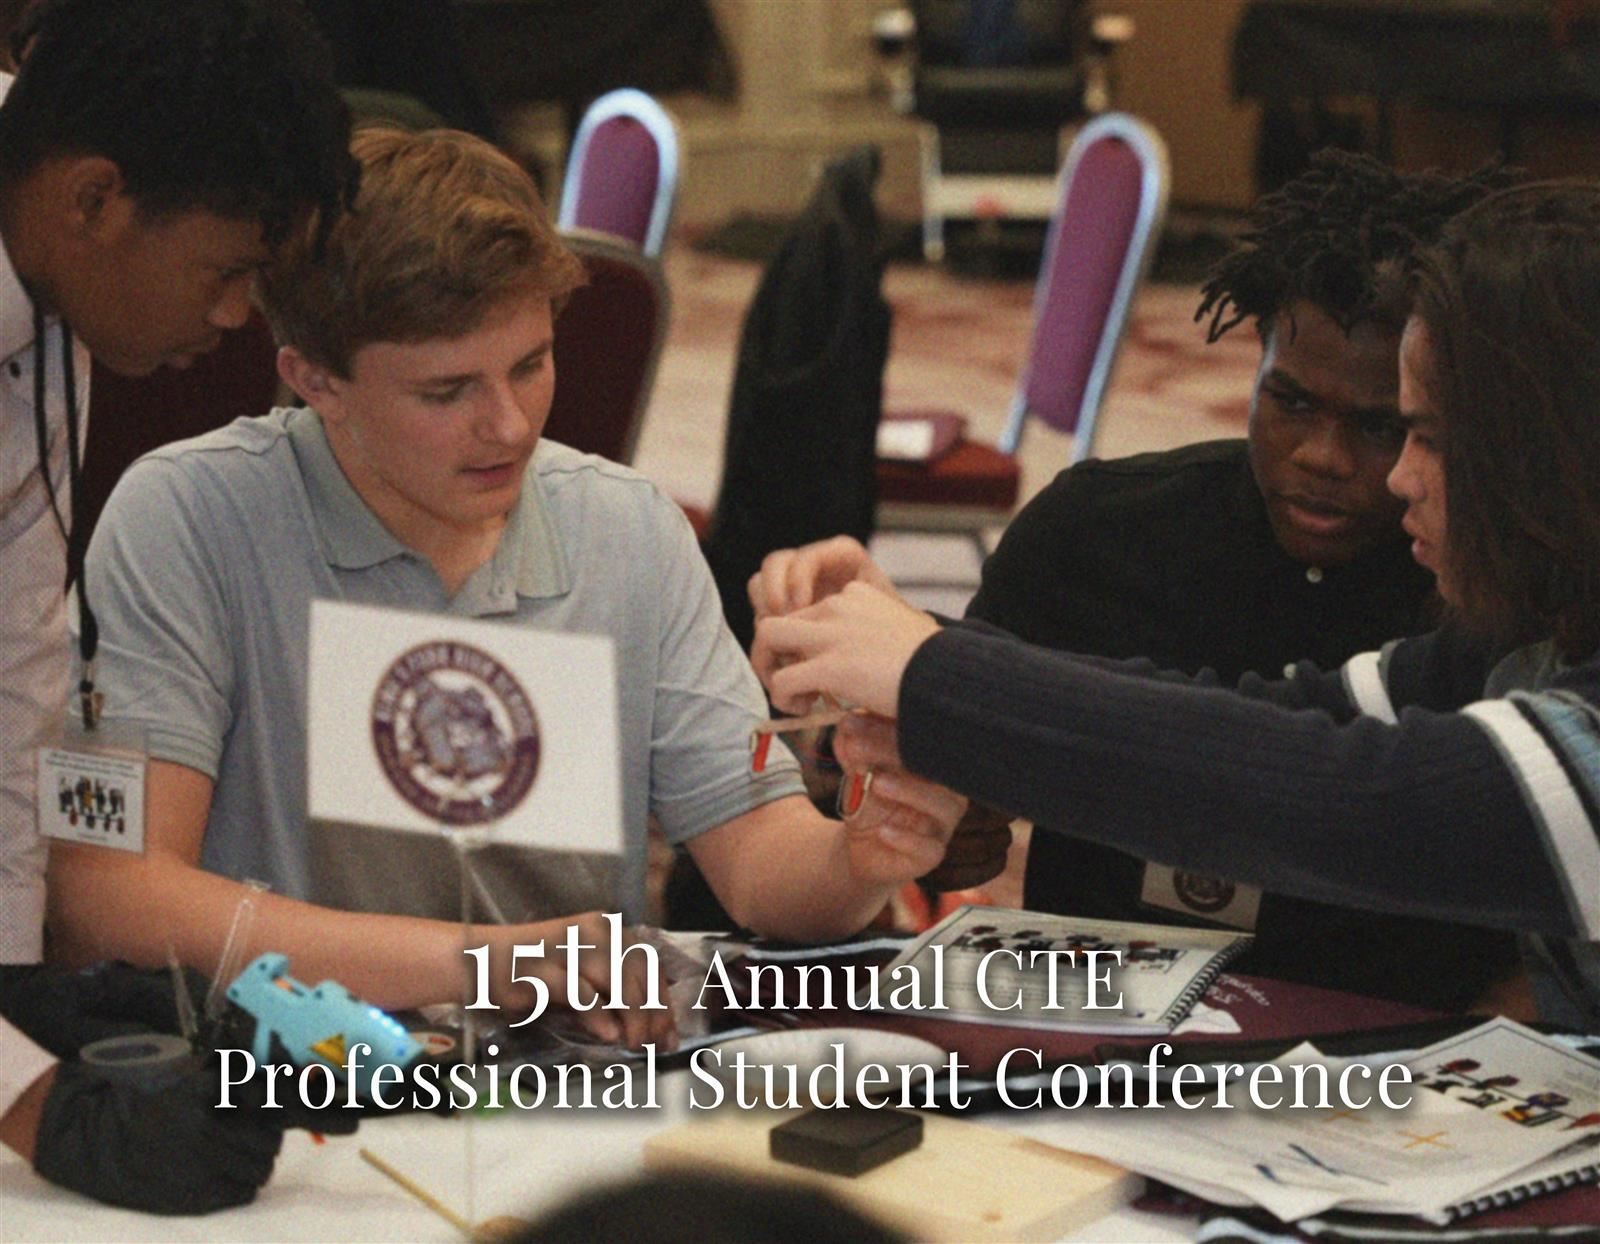  15th Annual CTE Professional Student Conference